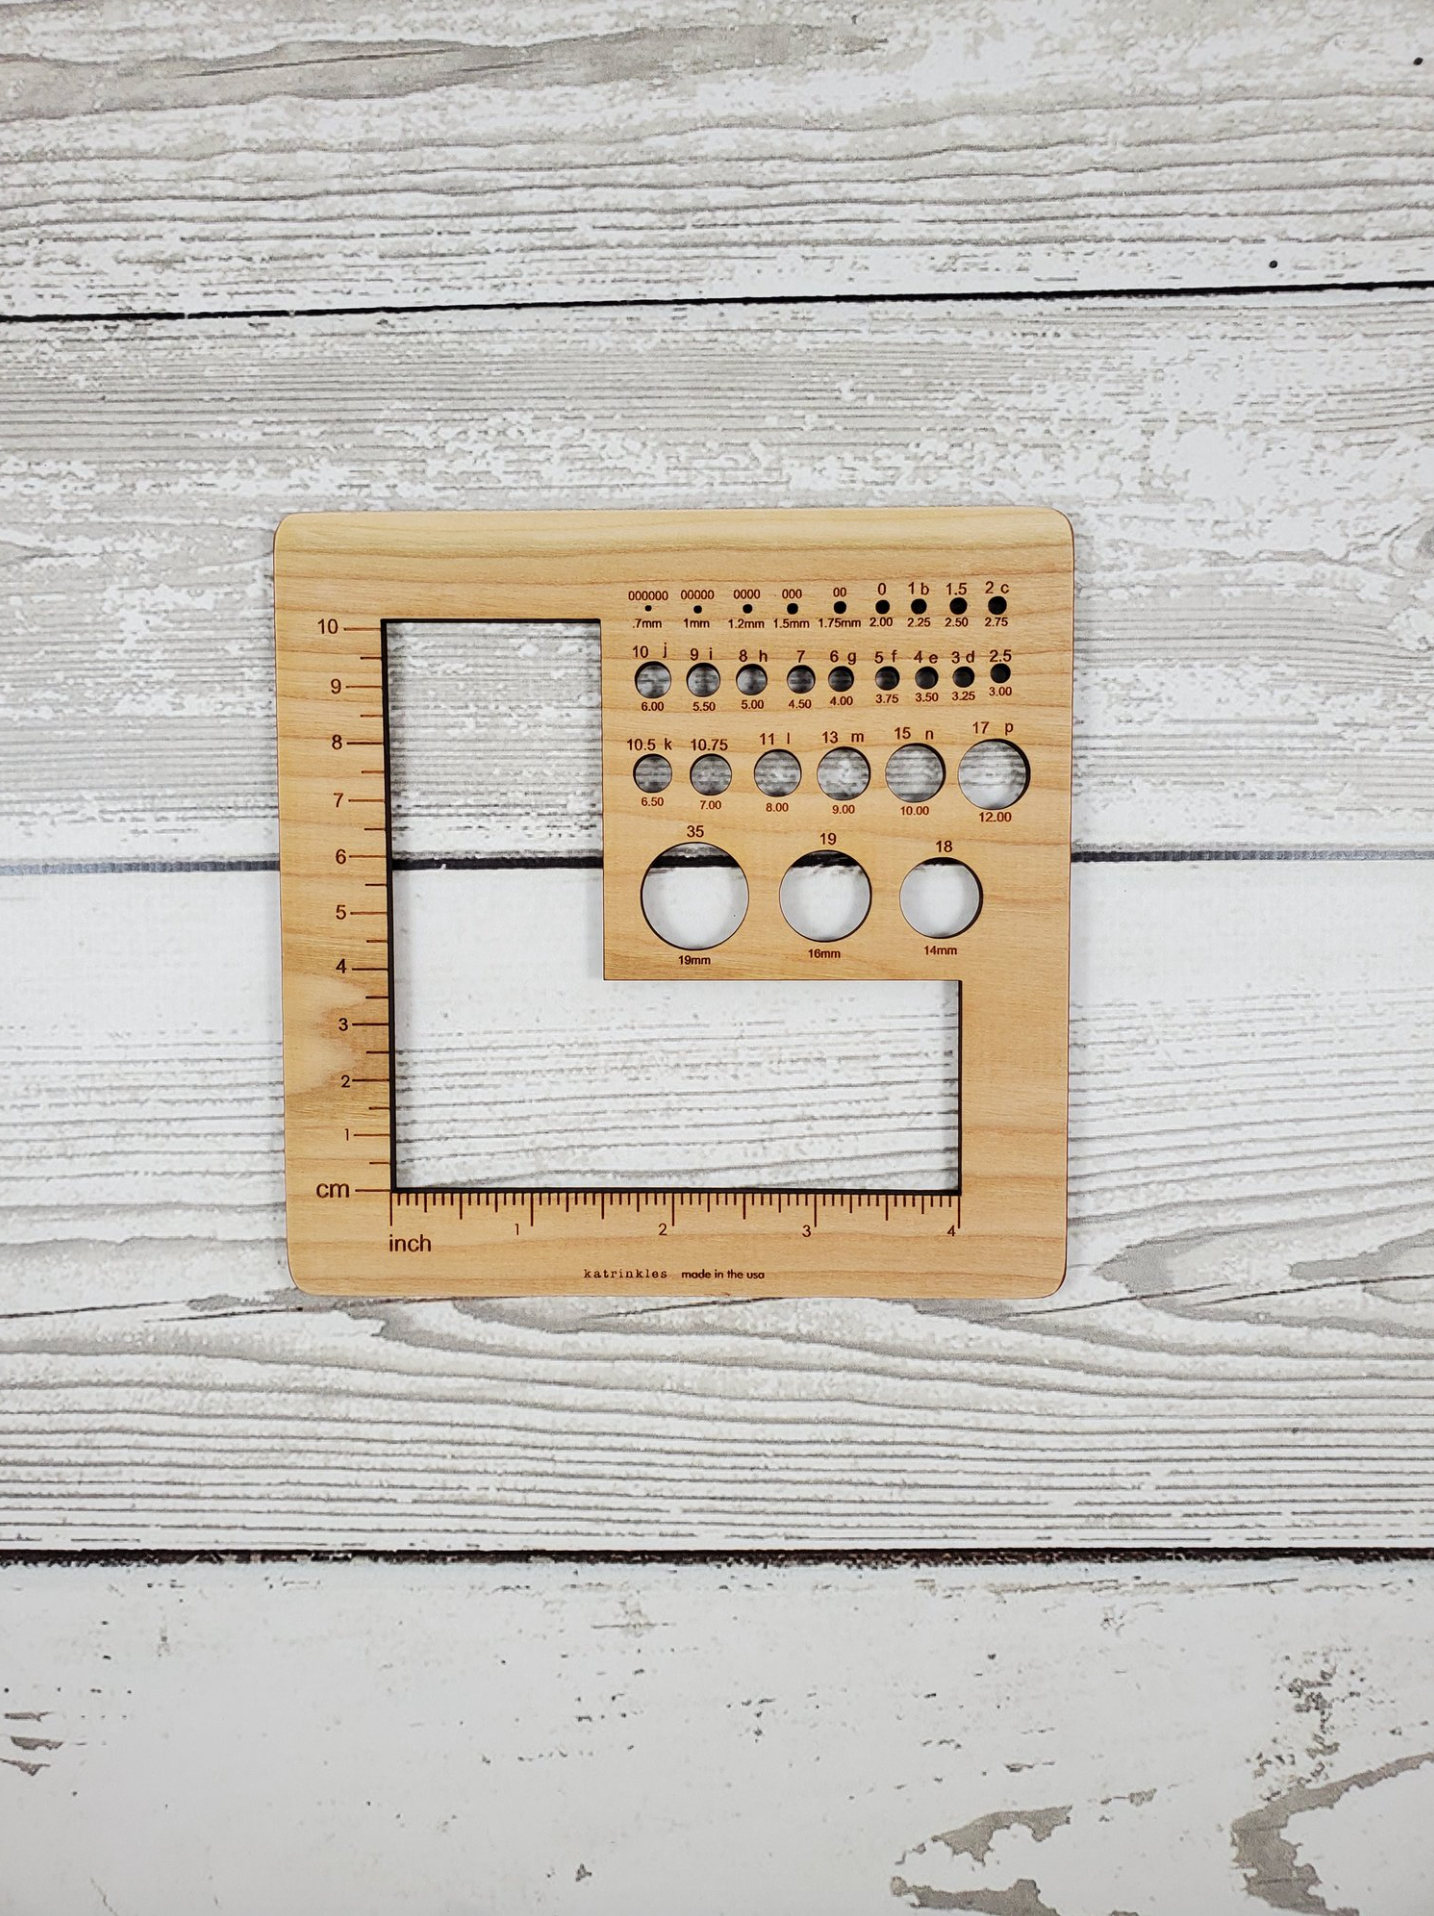 Knitting Needle Gauge - My Guide To Using These Handy Tools